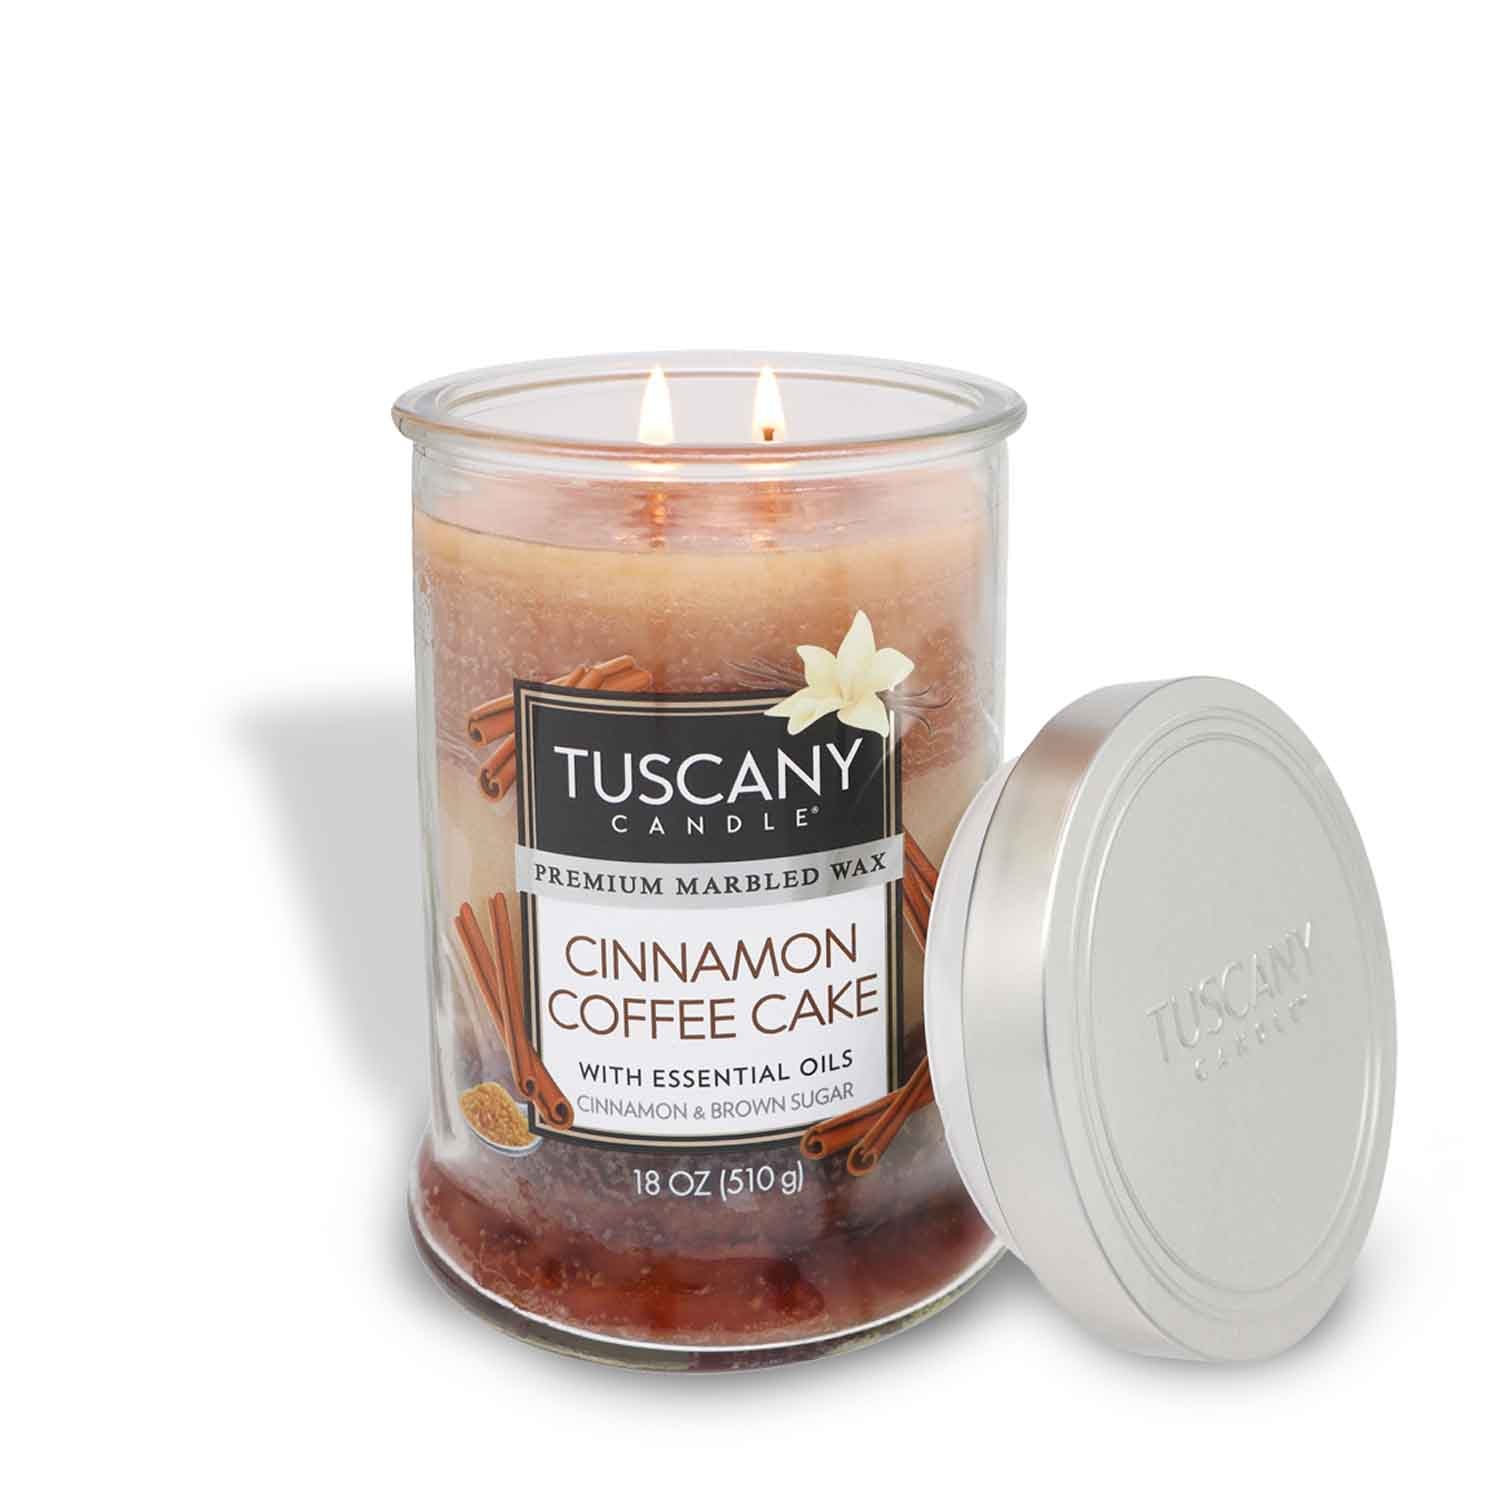 This Cinnamon Coffee Cake Long-Lasting Scented Jar Candle (18 oz) from Tuscany Candle brings the warm and inviting aroma of Tuscany cinnamon coffee to any space. With fragrance notes reminiscent of a freshly baked Cinnamon Coffee Cake, this candle creates a cozy ambiance.